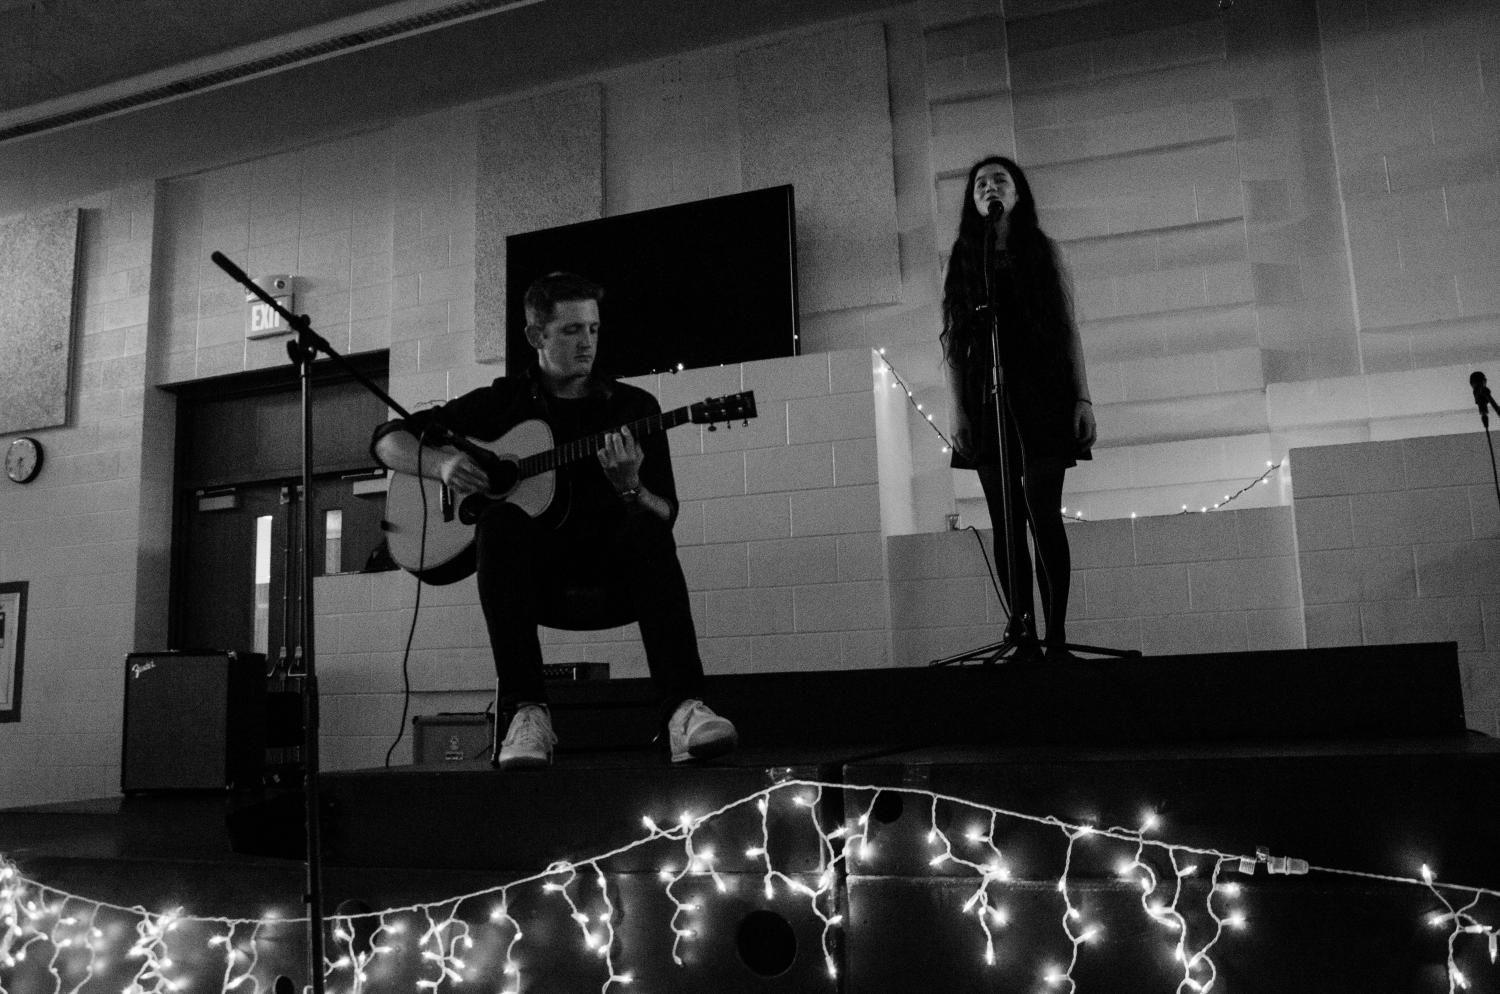 Social studies teacher Dominic Iannone performs Like a Star by Corinne Bailey Rae with Olivia Manaligod 18 for the fundraising Music Playathon held on May 20 in the West High Cafeteria.  